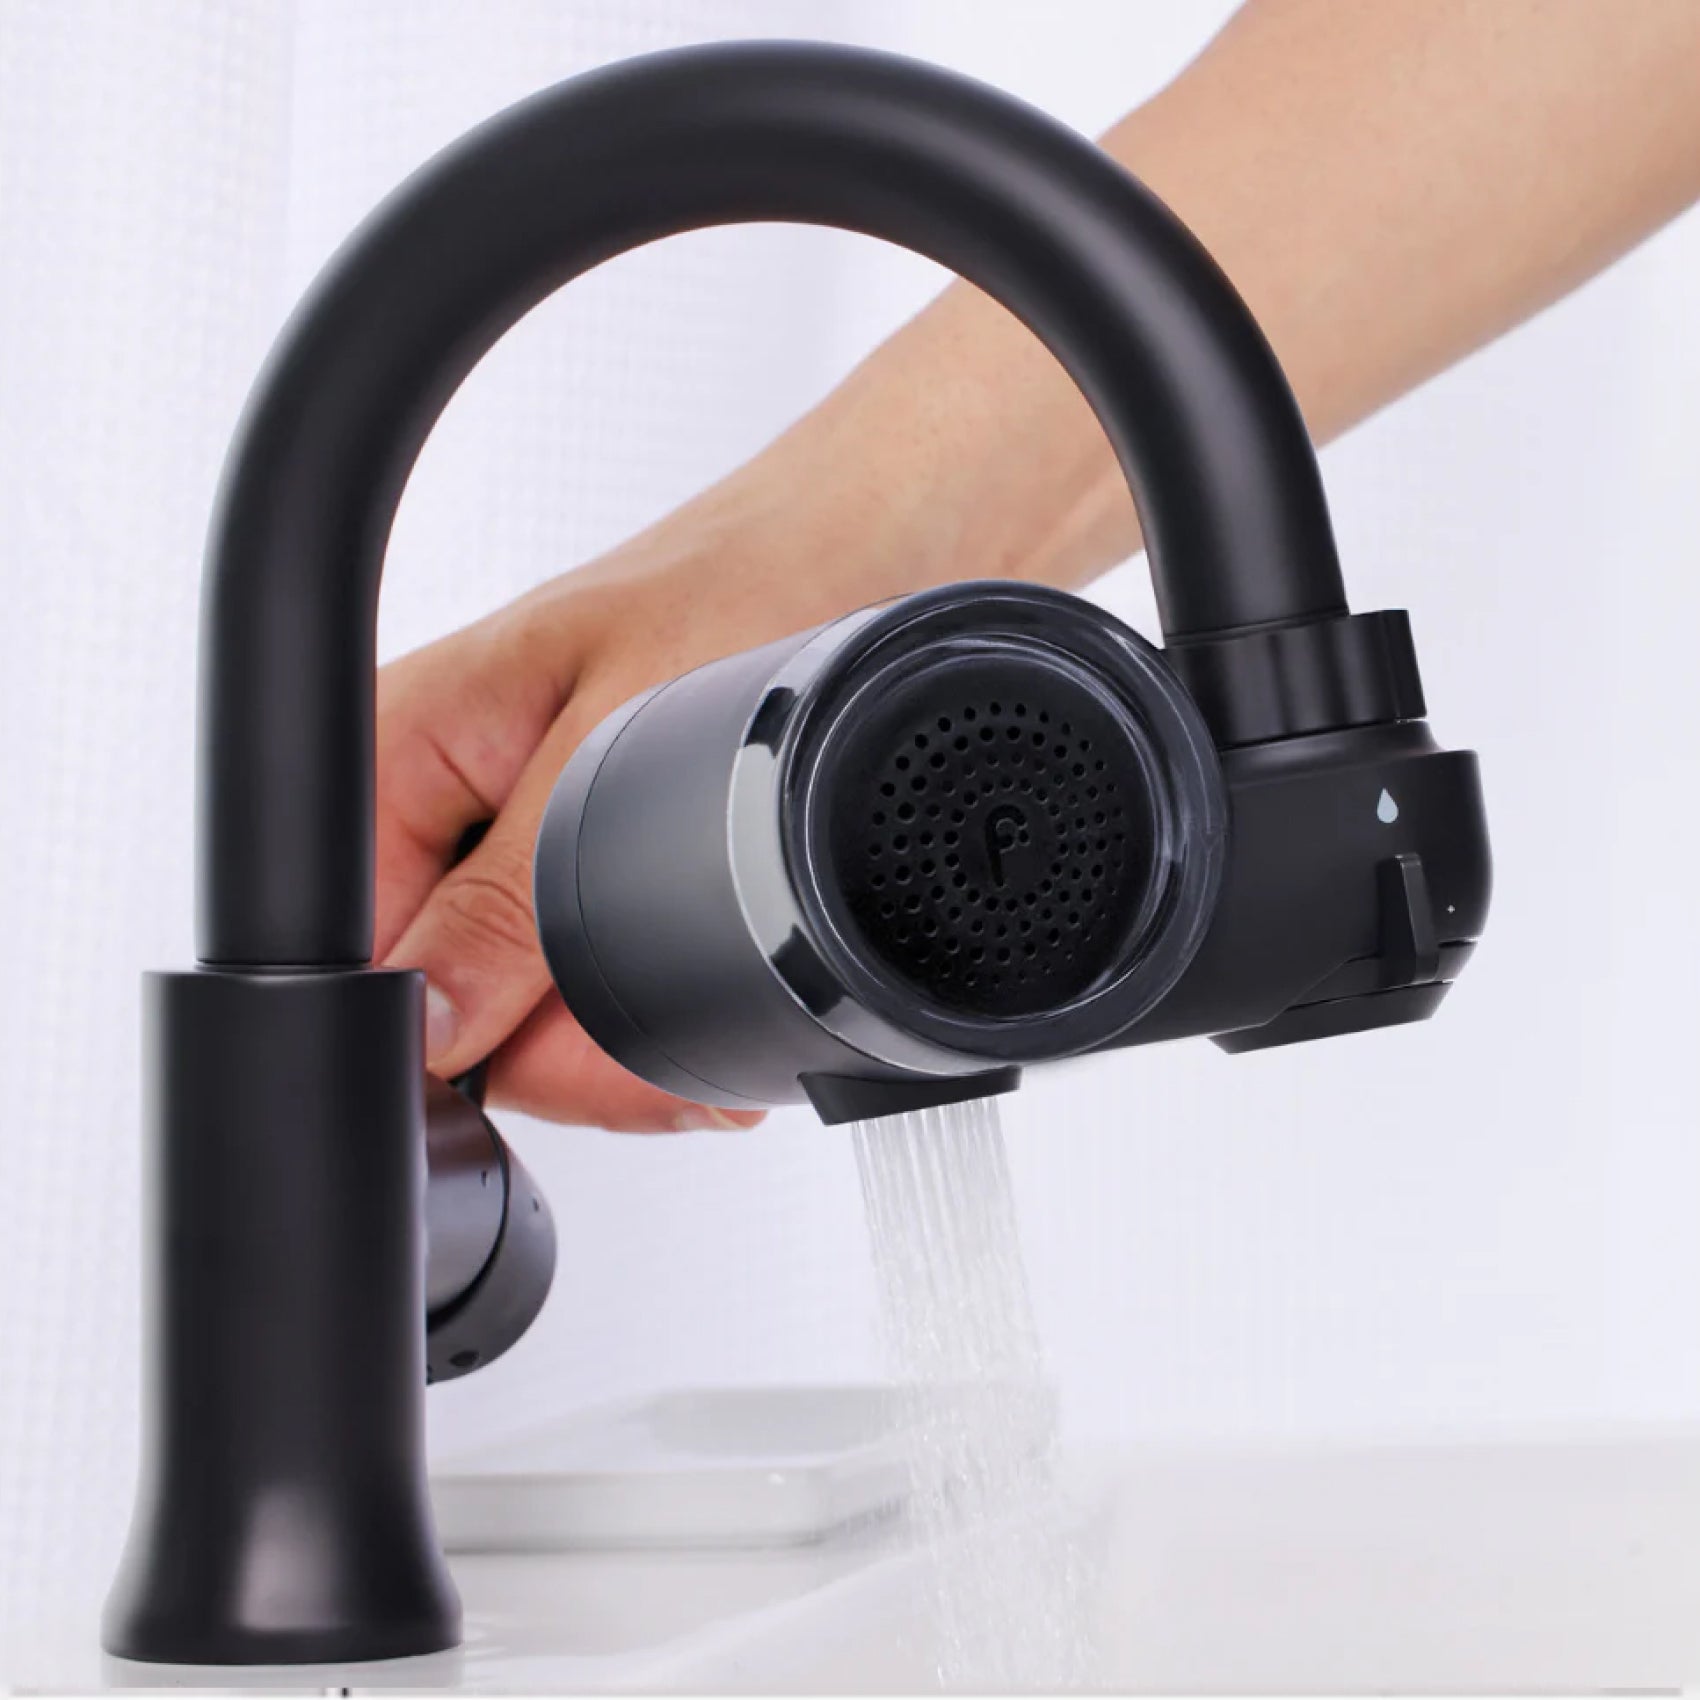 Hand holding a detachable black kitchen faucet head with water running.